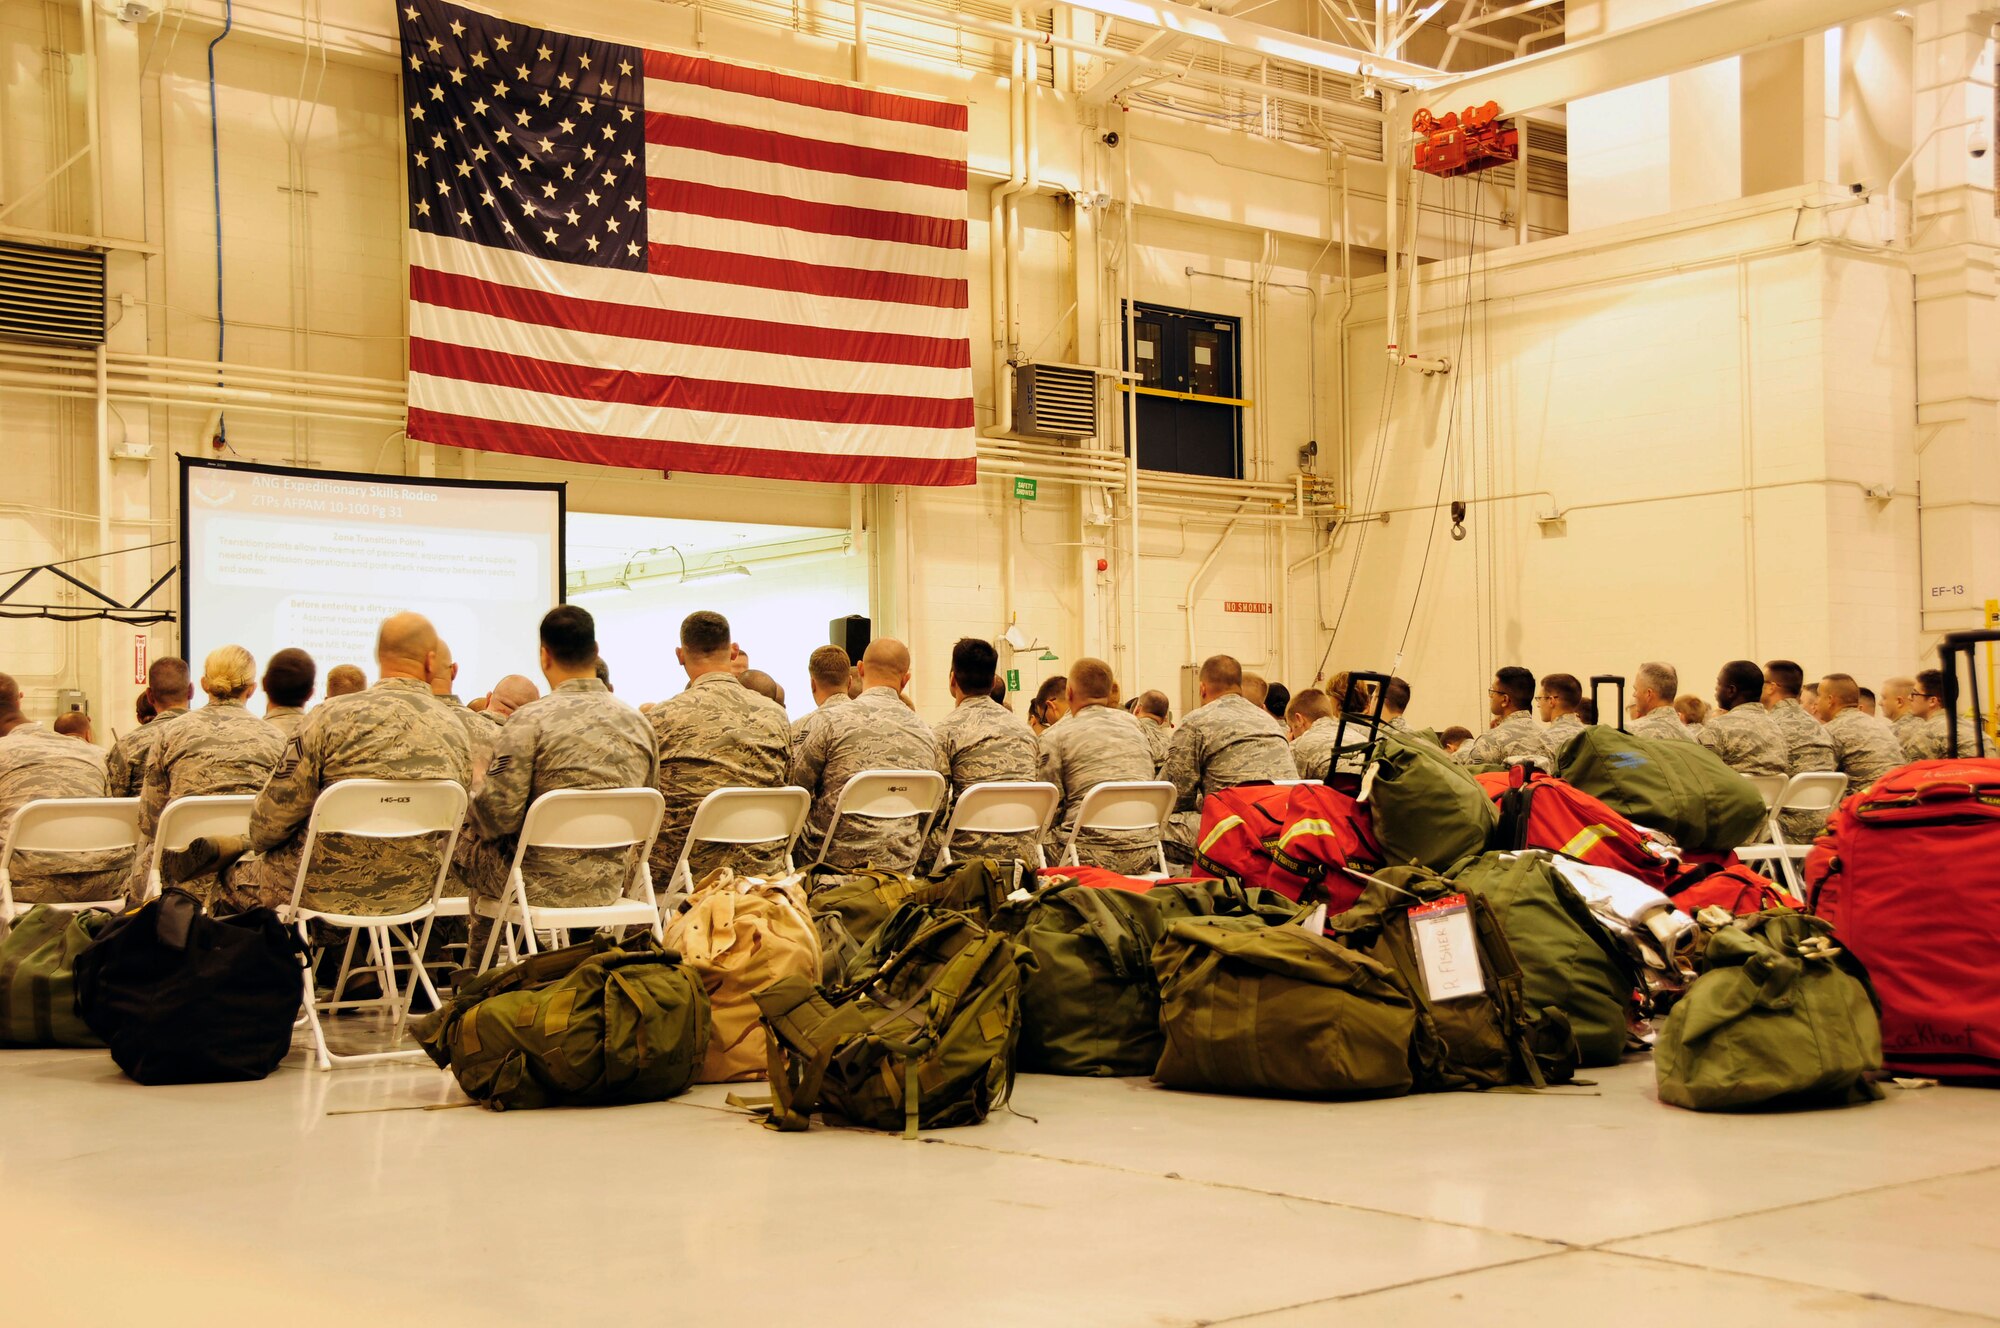 More than 100 Airmen gathered inside a hanger at the North Carolina Air National Guard Base, Charlotte Douglas International Airport, to receive hands-on chemical, biological, radiological and nuclear training along with self-aid buddy care during the 145th Airlift Wing’s Air Expeditionary Skills Rodeo training, Sept. 13, 2015. This training is used by Airmen who are deploying or preparing for inspections. These skills make up the foundation necessary for all Airmen to function effectively in non-conventional hostile environments. (U.S. Air National Guard photo by Master Sgt. Patricia F. Moran, 145th Public Affairs/Released)